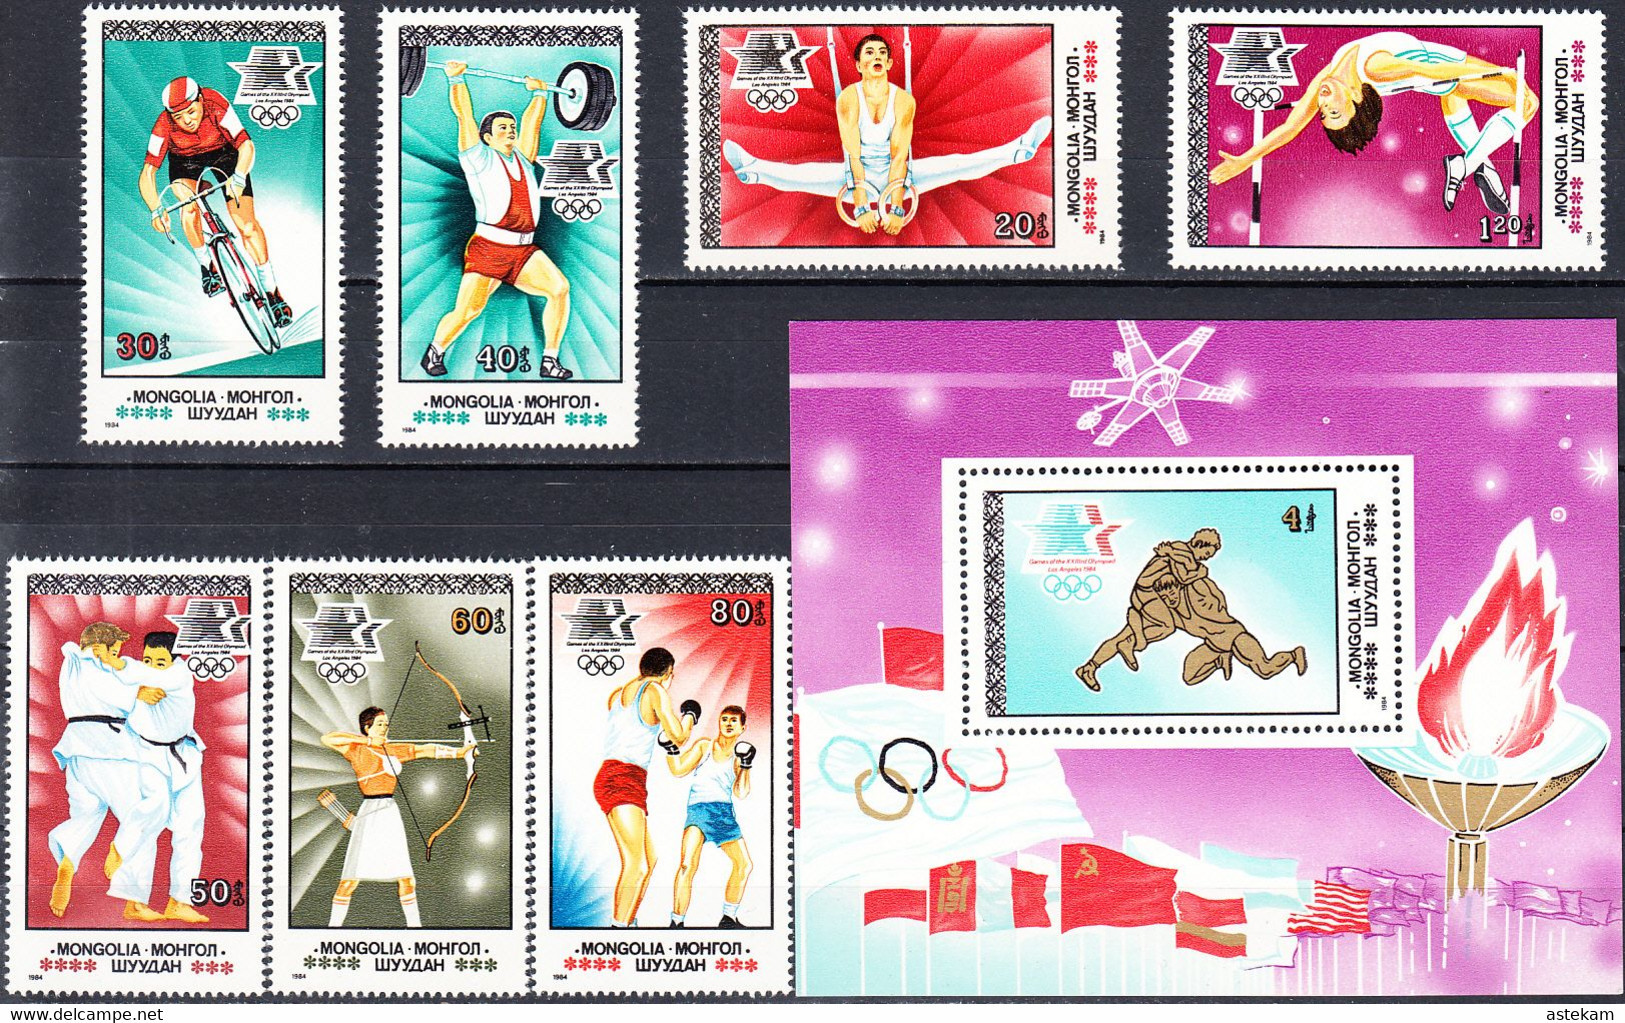 MONGOLIA 1984, SPORT, SUMMER OLYMPICS In LOS ANGELES, COMPLETE MNH SERIES With BLOCK In GOOD QUALITY, *** - Mongolie